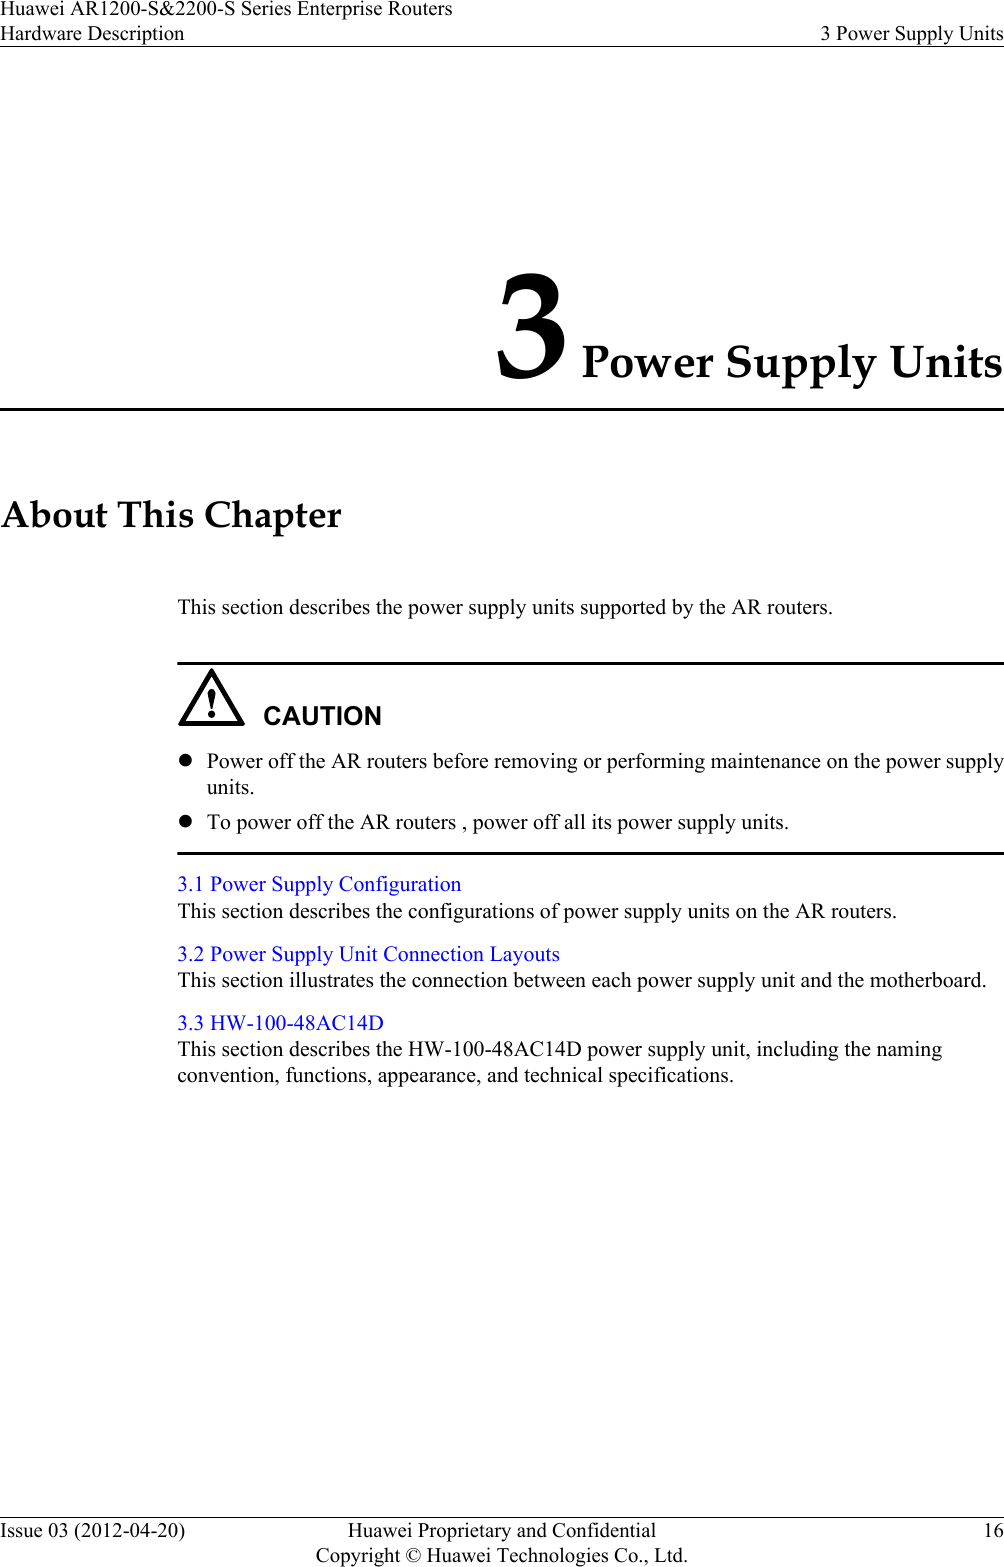 3 Power Supply UnitsAbout This ChapterThis section describes the power supply units supported by the AR routers.CAUTIONlPower off the AR routers before removing or performing maintenance on the power supplyunits.lTo power off the AR routers , power off all its power supply units.3.1 Power Supply ConfigurationThis section describes the configurations of power supply units on the AR routers.3.2 Power Supply Unit Connection LayoutsThis section illustrates the connection between each power supply unit and the motherboard.3.3 HW-100-48AC14DThis section describes the HW-100-48AC14D power supply unit, including the namingconvention, functions, appearance, and technical specifications.Huawei AR1200-S&amp;2200-S Series Enterprise RoutersHardware Description 3 Power Supply UnitsIssue 03 (2012-04-20) Huawei Proprietary and ConfidentialCopyright © Huawei Technologies Co., Ltd.16